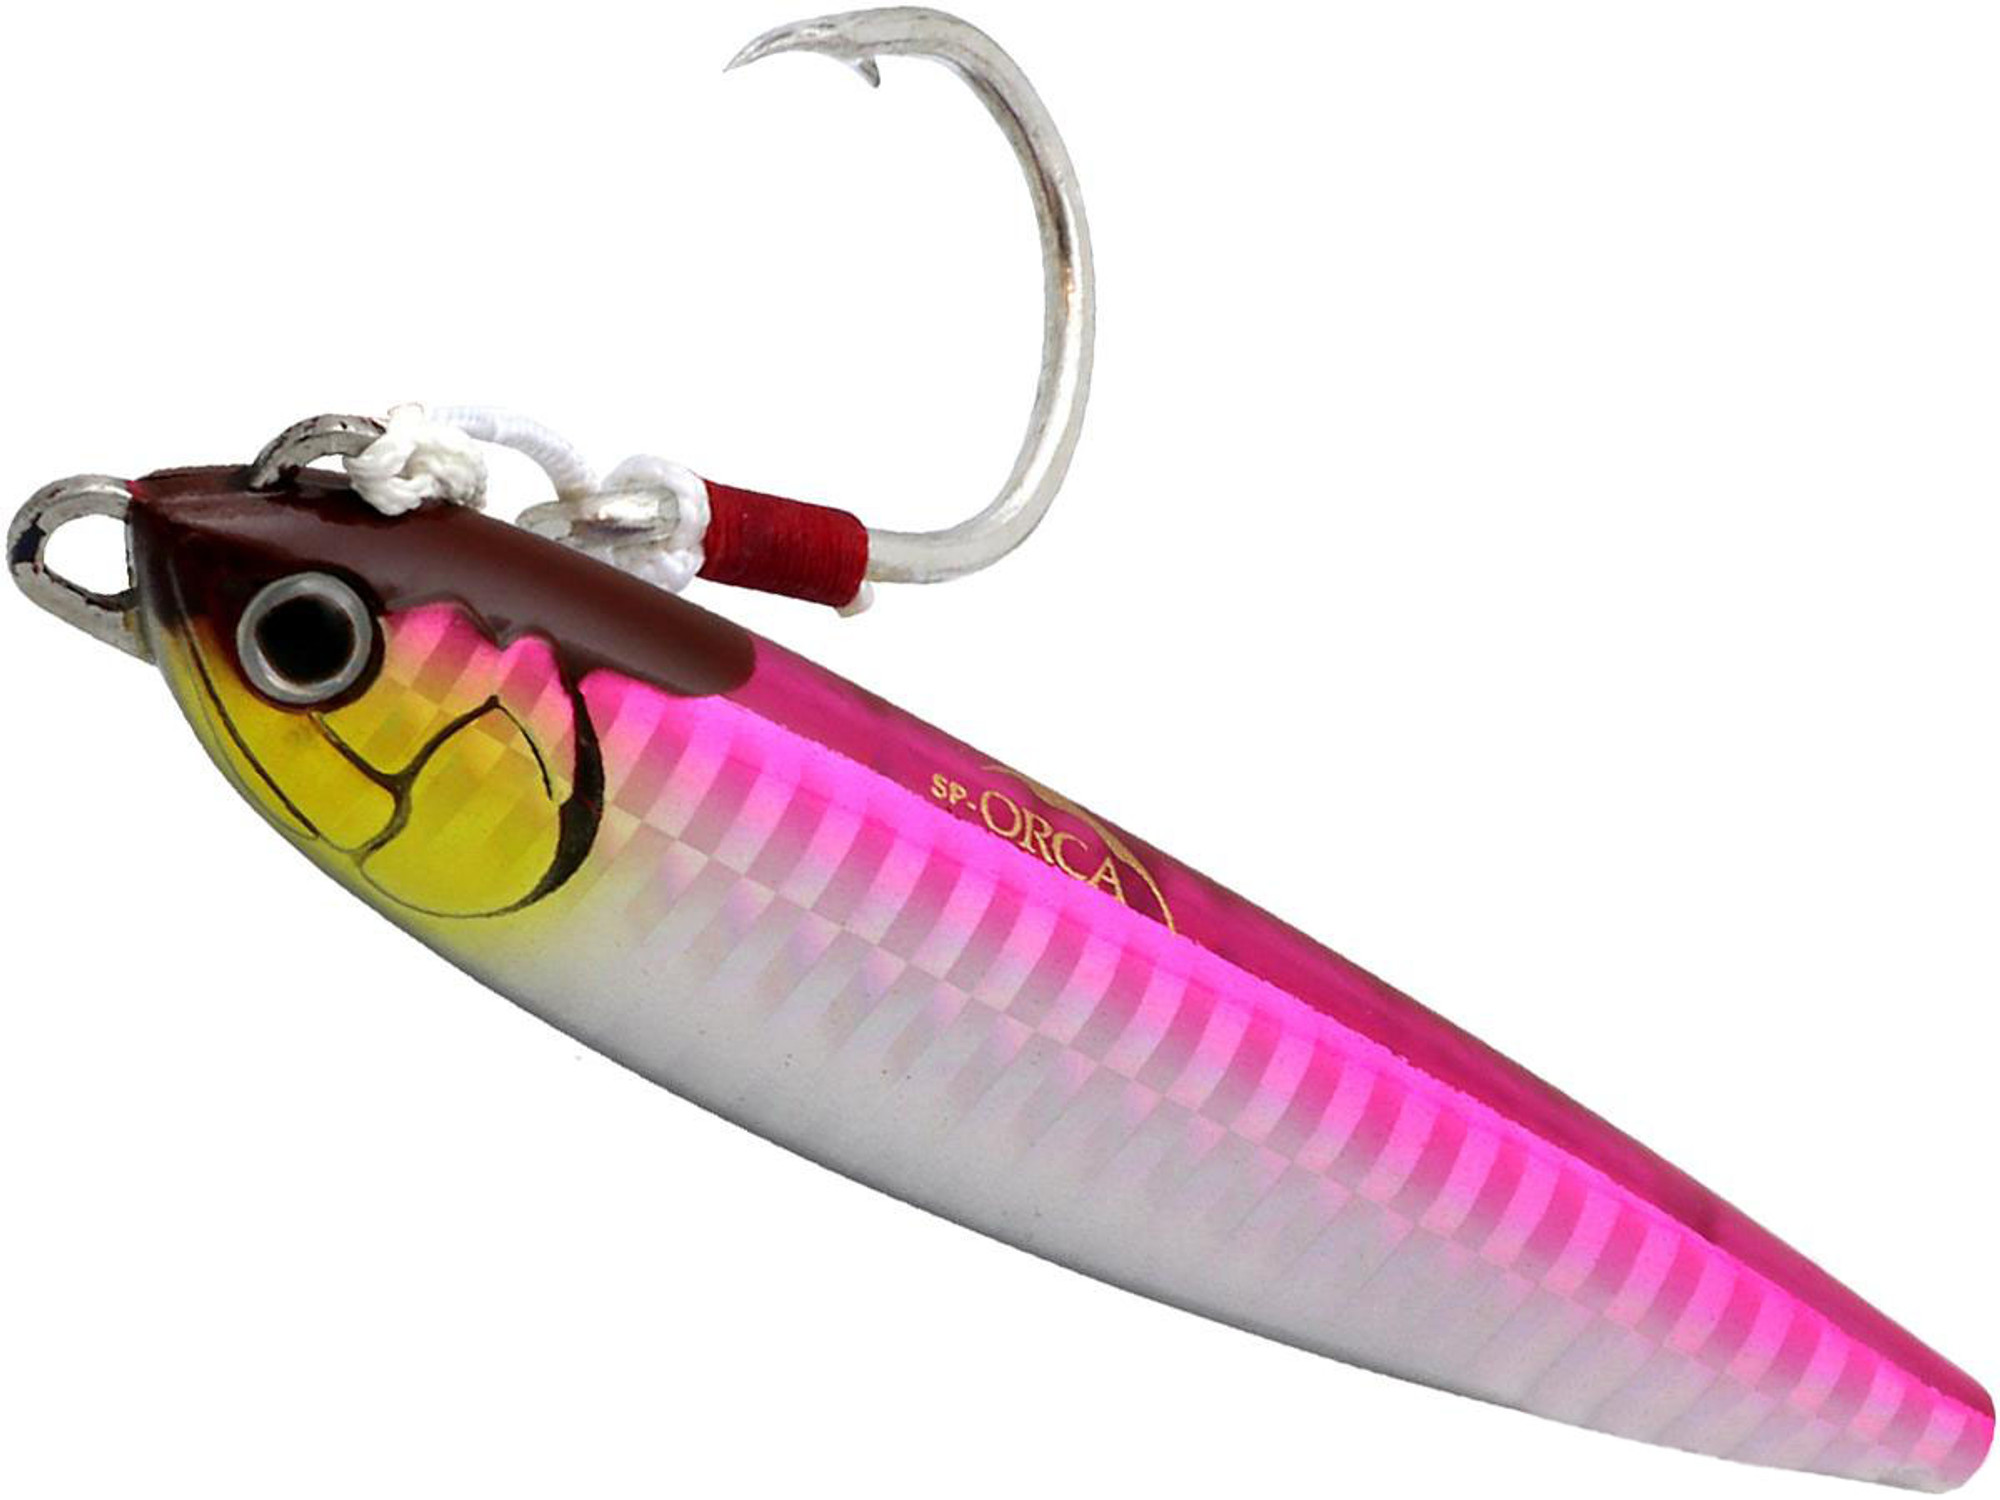 Shimano SP-Orca Baby Sub-Surface Fishing Lure (Model: 90mm / Pink Silver)